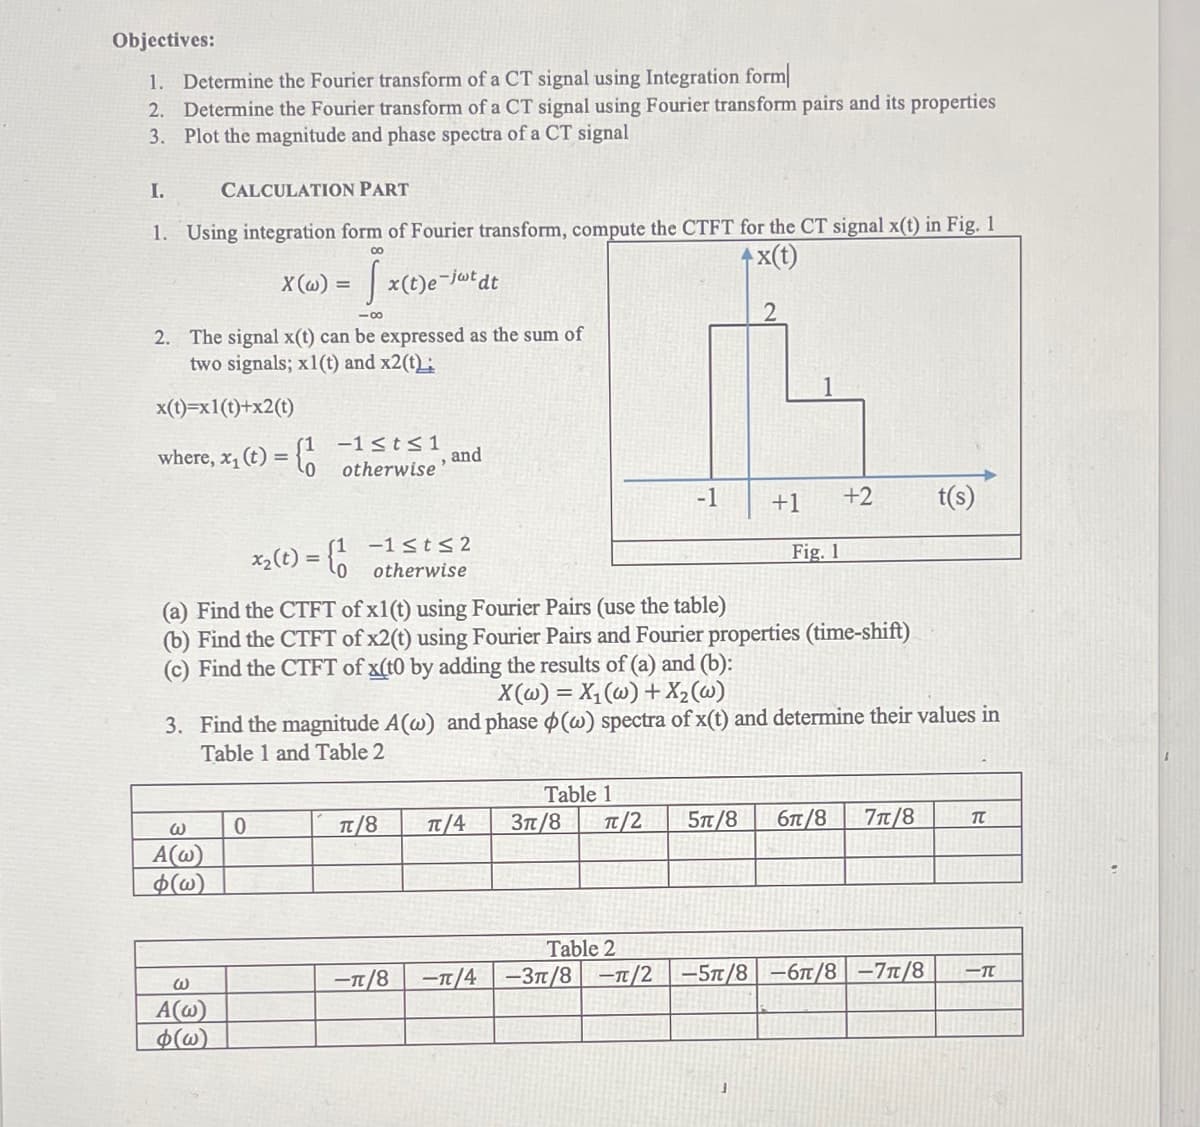 Objectives:
1. Determine the Fourier transform of a CT signal using Integration form
2. Determine the Fourier transform of a CT signal using Fourier transform pairs and its properties
3. Plot the magnitude and phase spectra of a CT signal
I.
CALCULATION PART
1. Using integration form of Fourier transform, compute the CTFT for the CT signal x(t) in Fig. 1
x(t)
8.
X (@) =
x(t)e-jutdt
-00
2. The signal x(t) can be expressed as the sum of
two signals; x1(t) and x2(t);
x(t)=x1(t)+x2(t)
where, x, (t) = {6
-1 st<1
and
otherwise'
-1
+1
+2
t(s)
(1 -1 <t< 2
x2(t) = t0
Fig. 1
otherwise
(a) Find the CTFT of x1(t) using Fourier Pairs (use the table)
(b) Find the CTFT of x2(t) using Fourier Pairs and Fourier properties (time-shift)
(c) Find the CTFT of x(t0 by adding the results of (a) and (b):
X(@) = X,(@) + X2(@)
3. Find the magnitude A(w) and phase (w) spectra of x(t) and determine their values in
Table 1 and Table 2
Table 1
T/8
T/4
Зп/8
Tt/2
5t/8
би /8
7TT/8
A(@)
$(@)
Table 2
-/8
-T/4-3T/8 -T/2 |-5T/8 -61/8 -71/8
A(@)
$(w)
